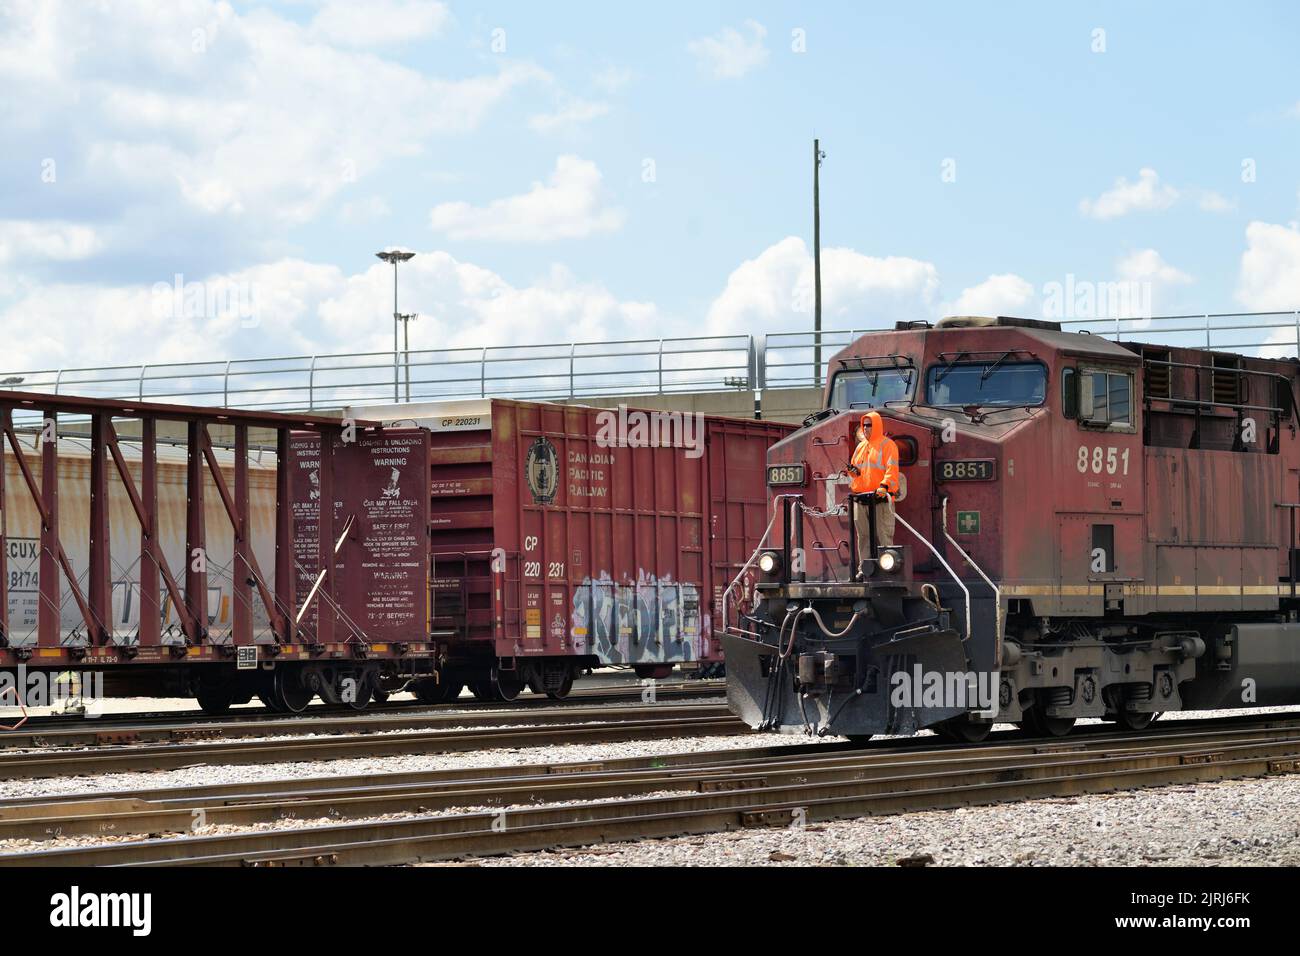 Franklin Park, Illinois, USA. With a crew member riding the front platform of the lead locomotive, a freight train departs a railroad yard. Stock Photo